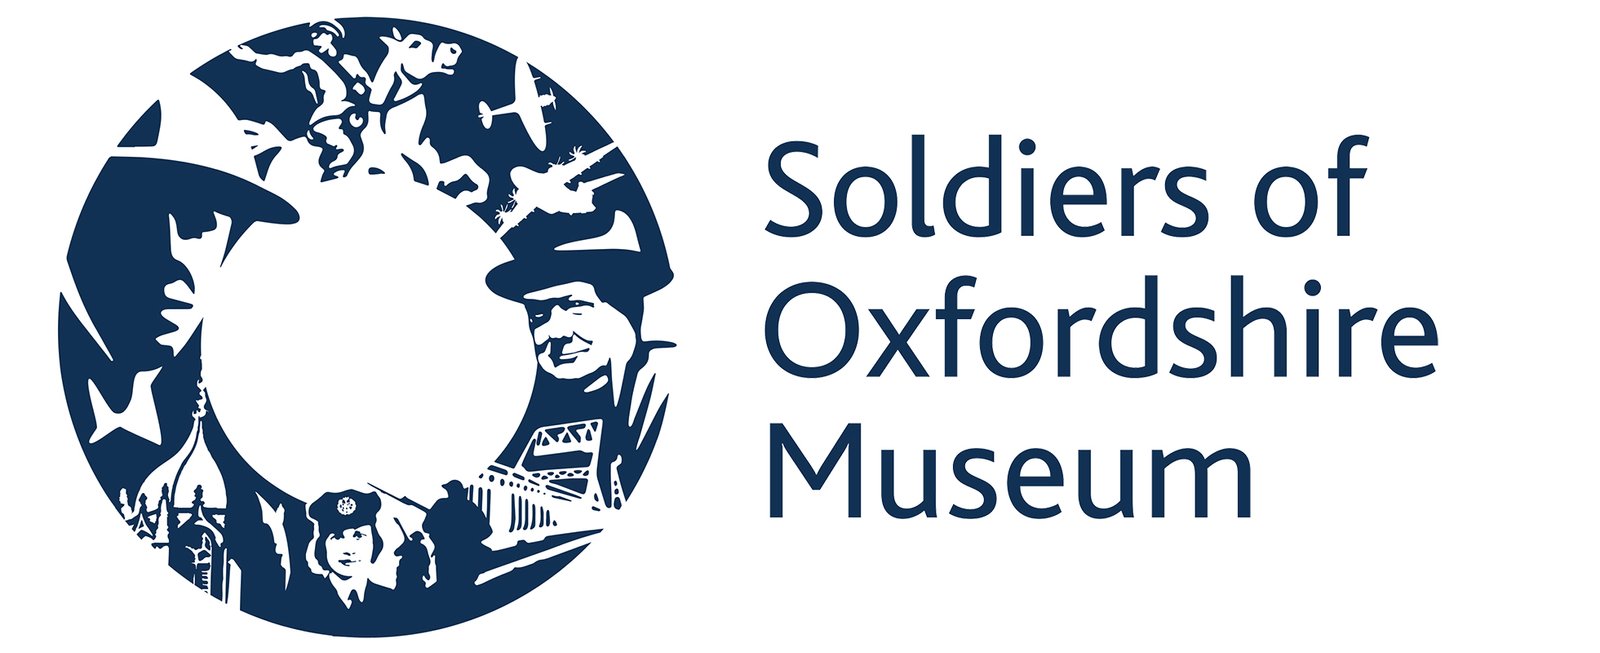 Soldiers of Oxfordshire Museum logo